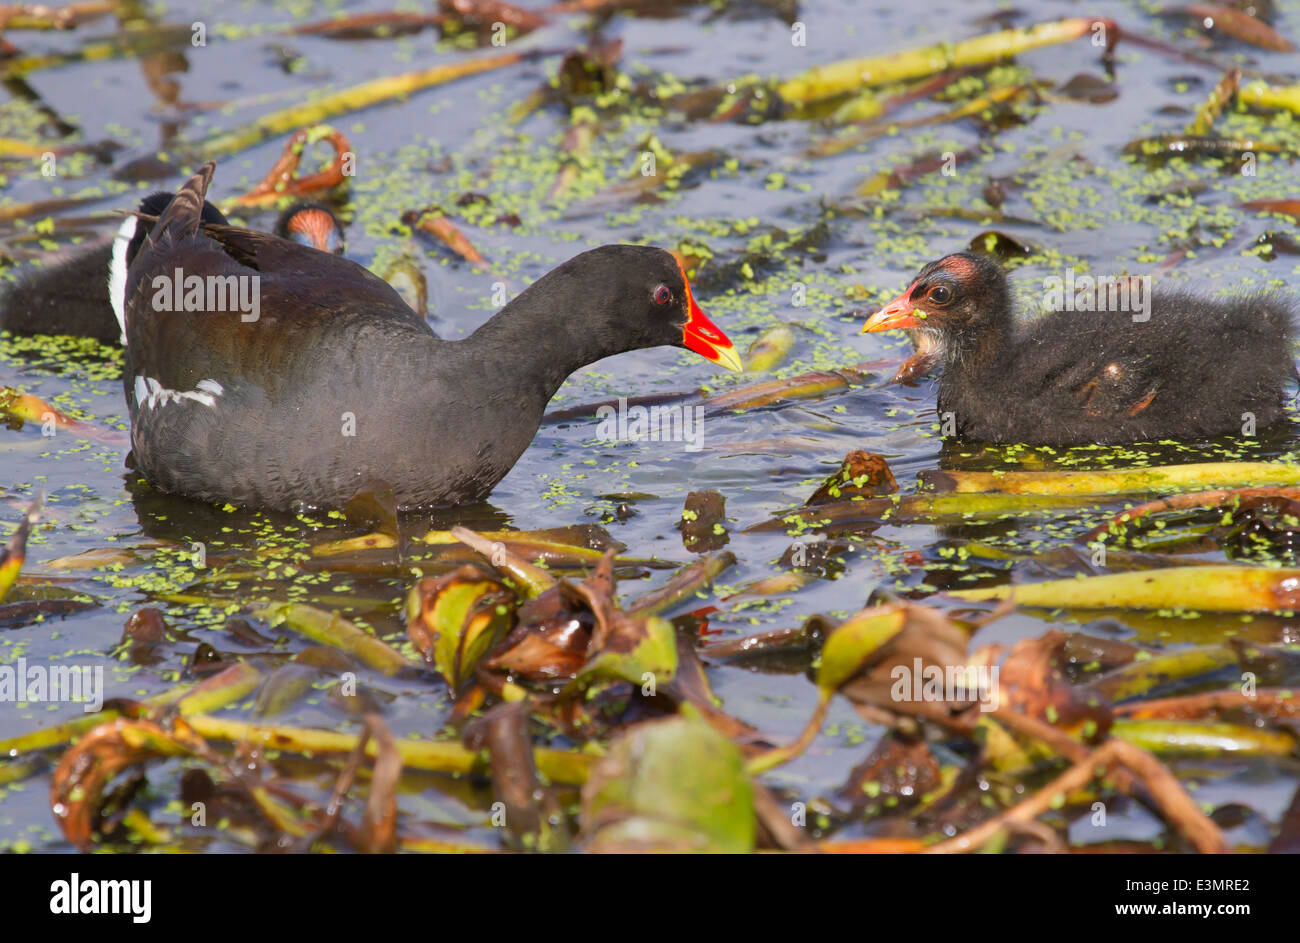 Common Gallinule (Gallinula galeata) with a chick. Stock Photo